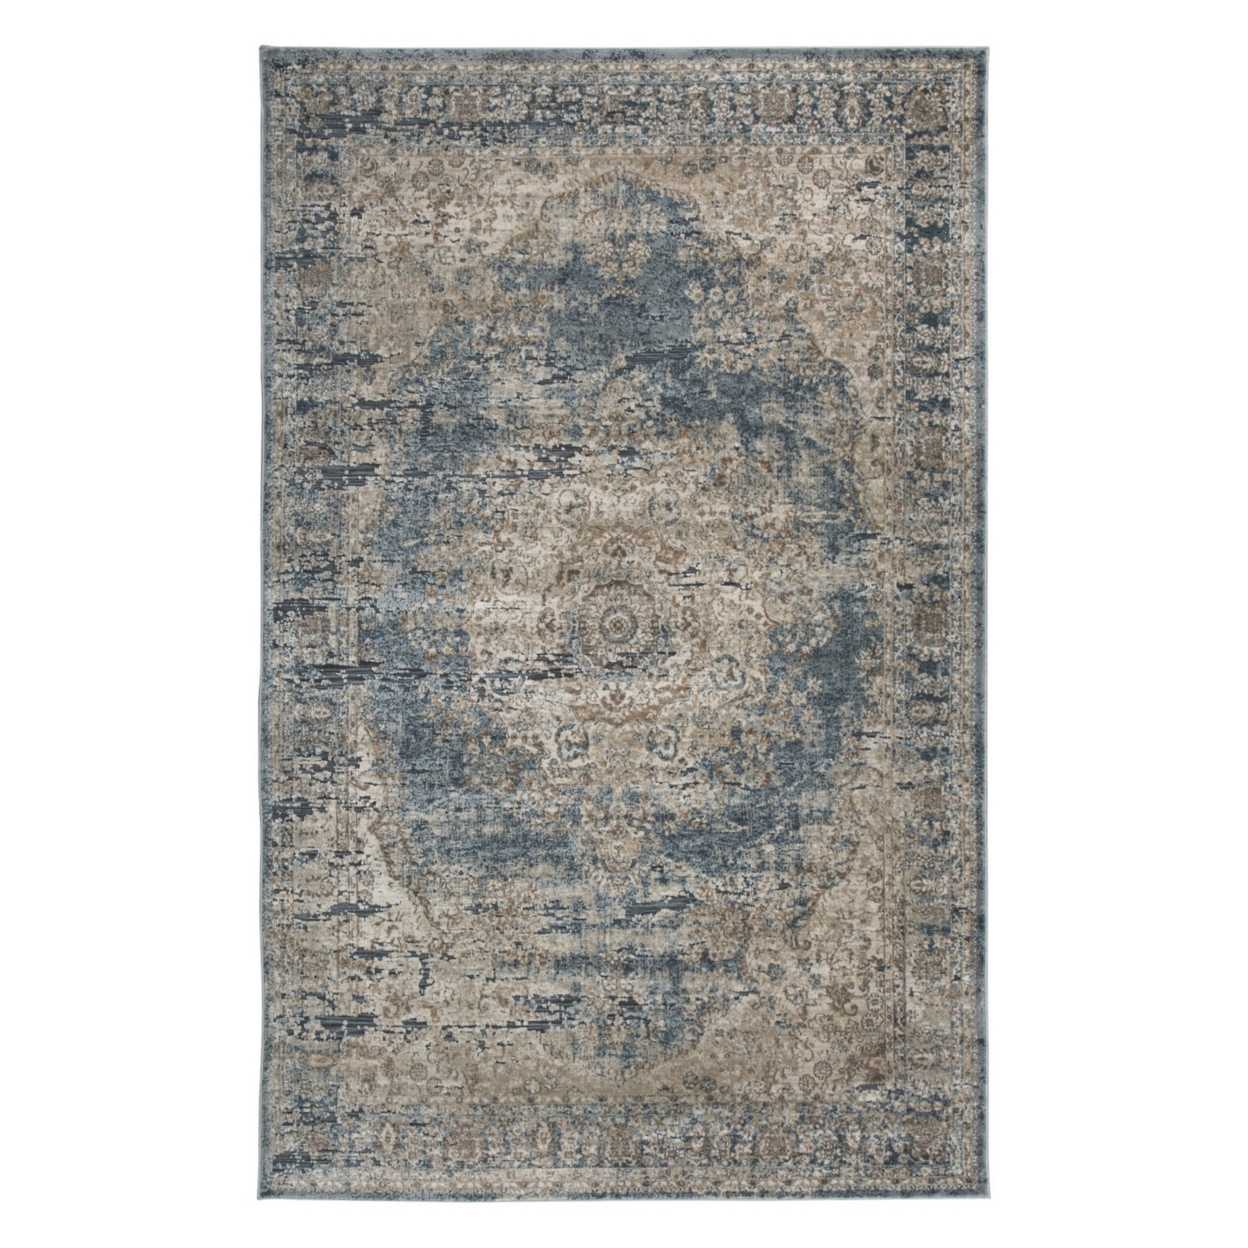 120 X 96 Inches Polypropylene Rug With Medallion Print, Blue And Beige- Saltoro Sherpi